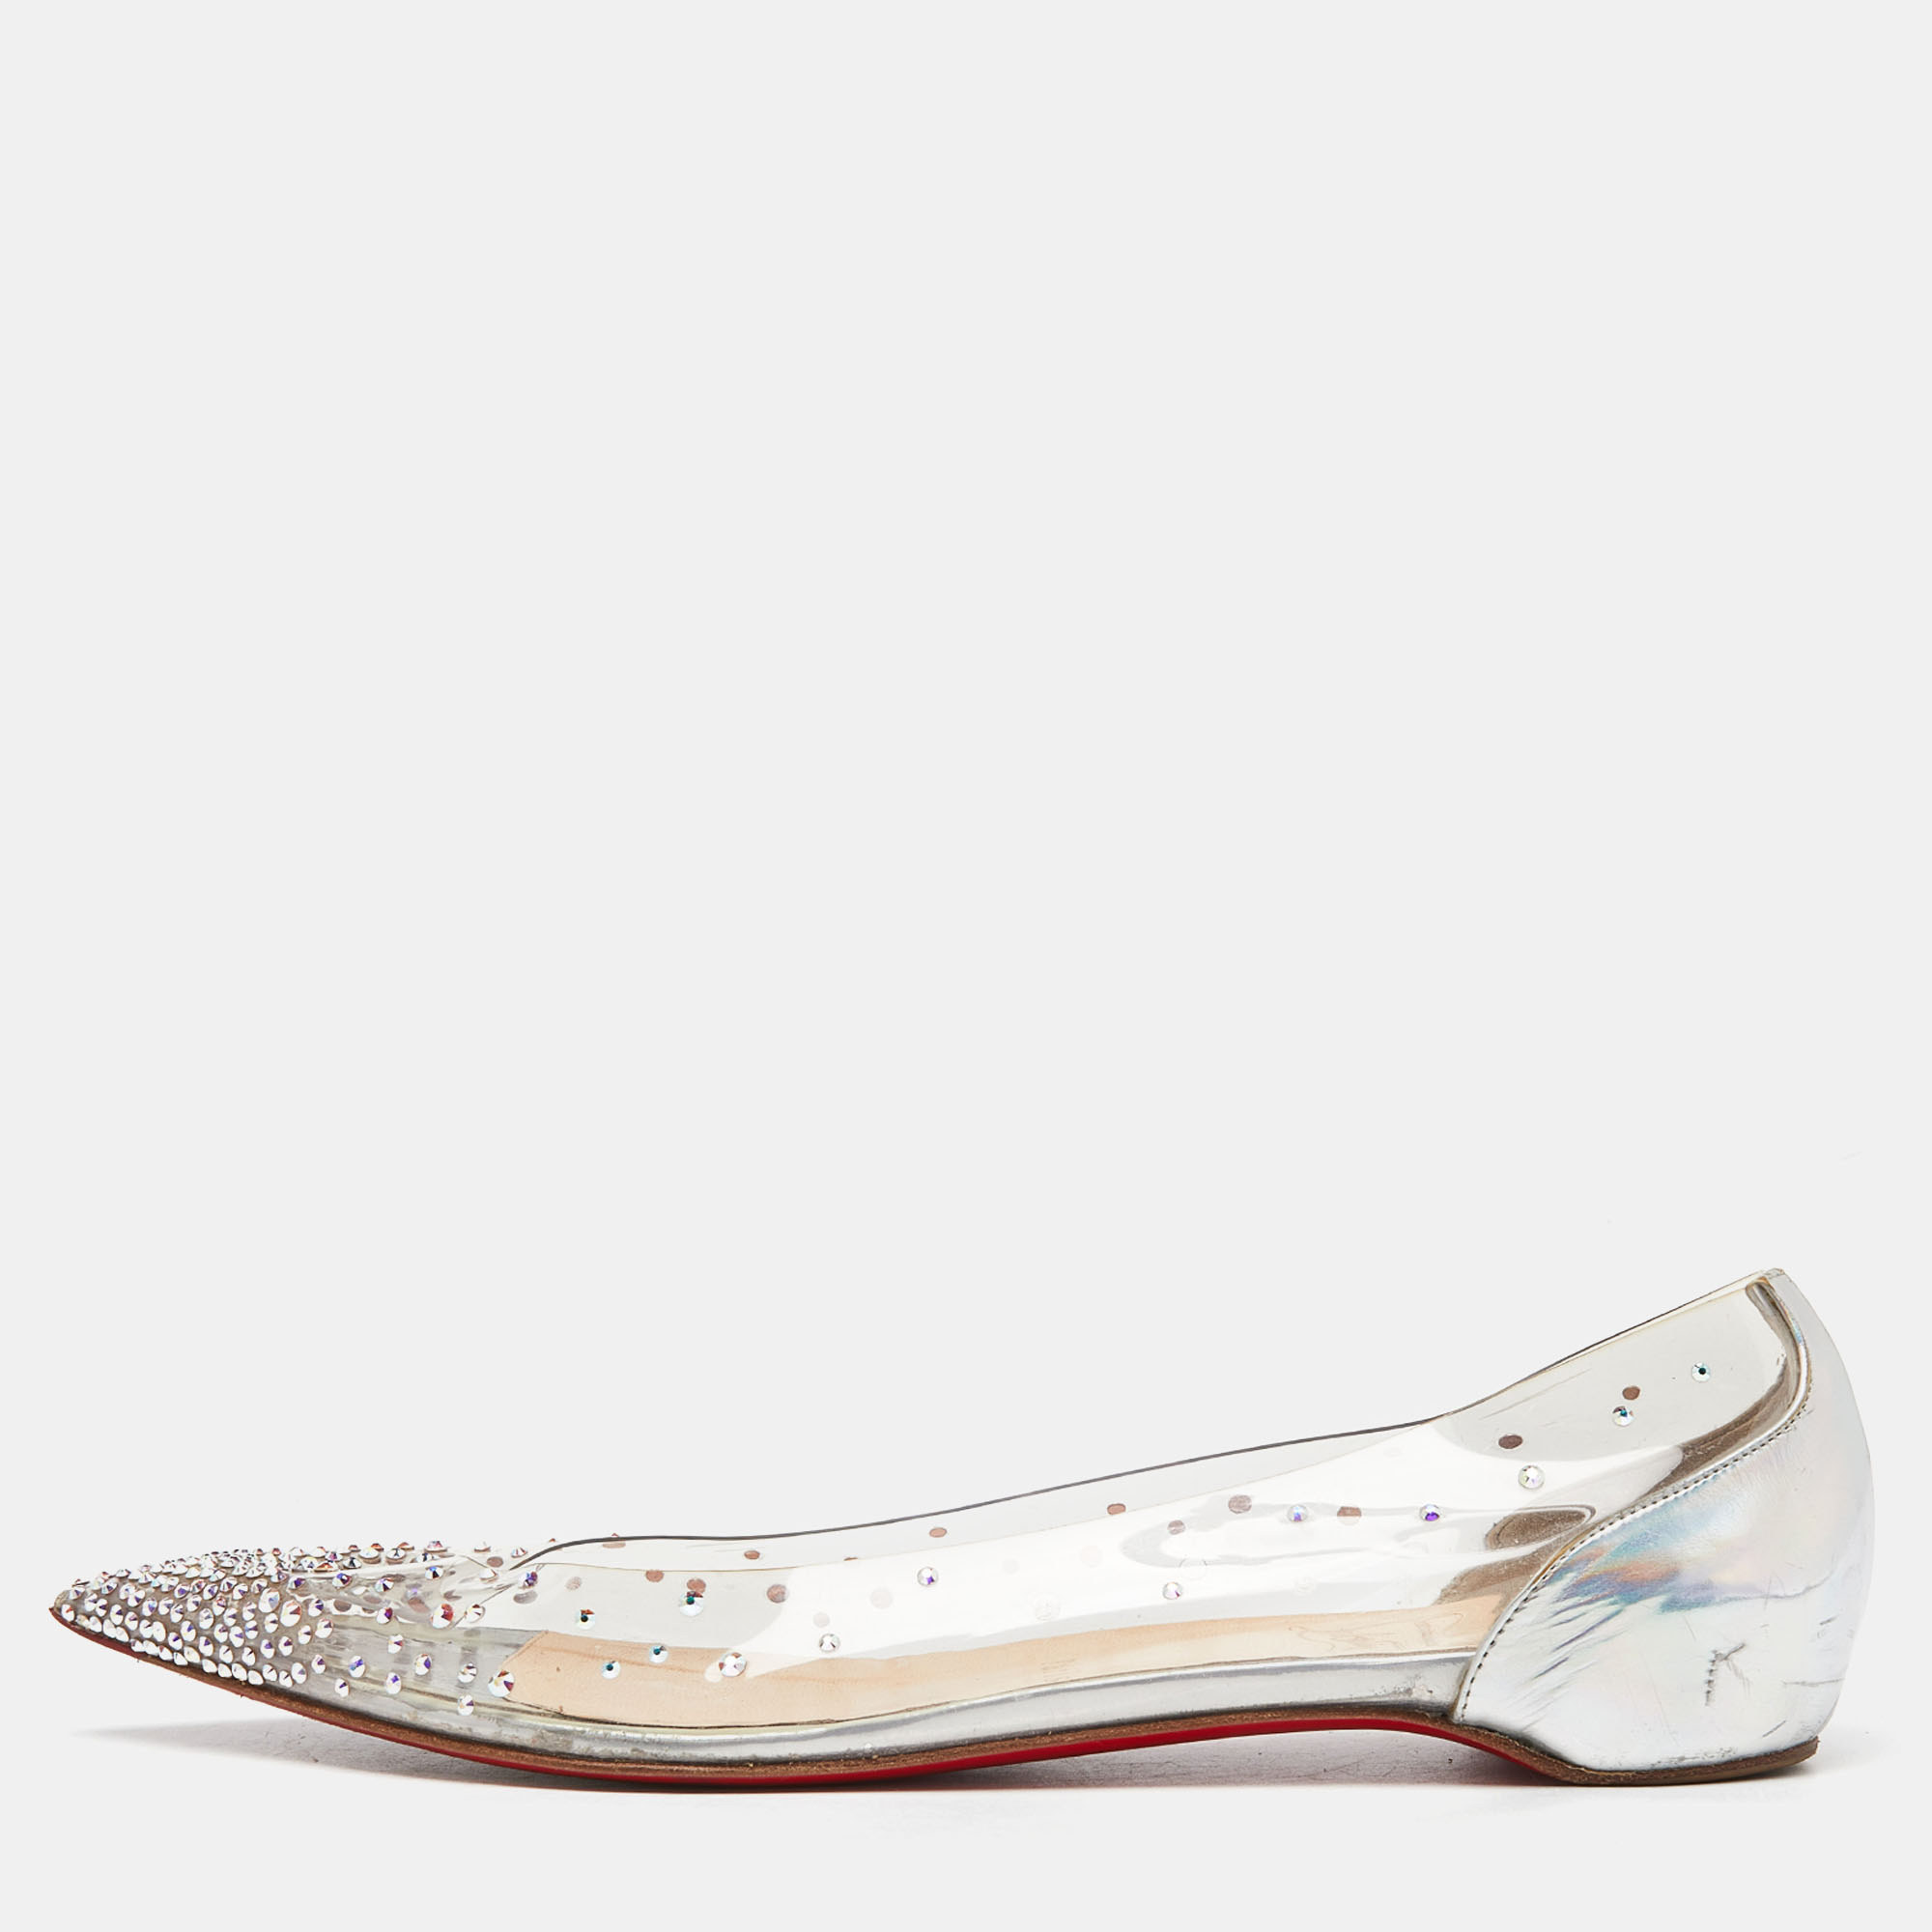 Christian louboutin transparent pvc and patent leather follies strass ballet flats size 40